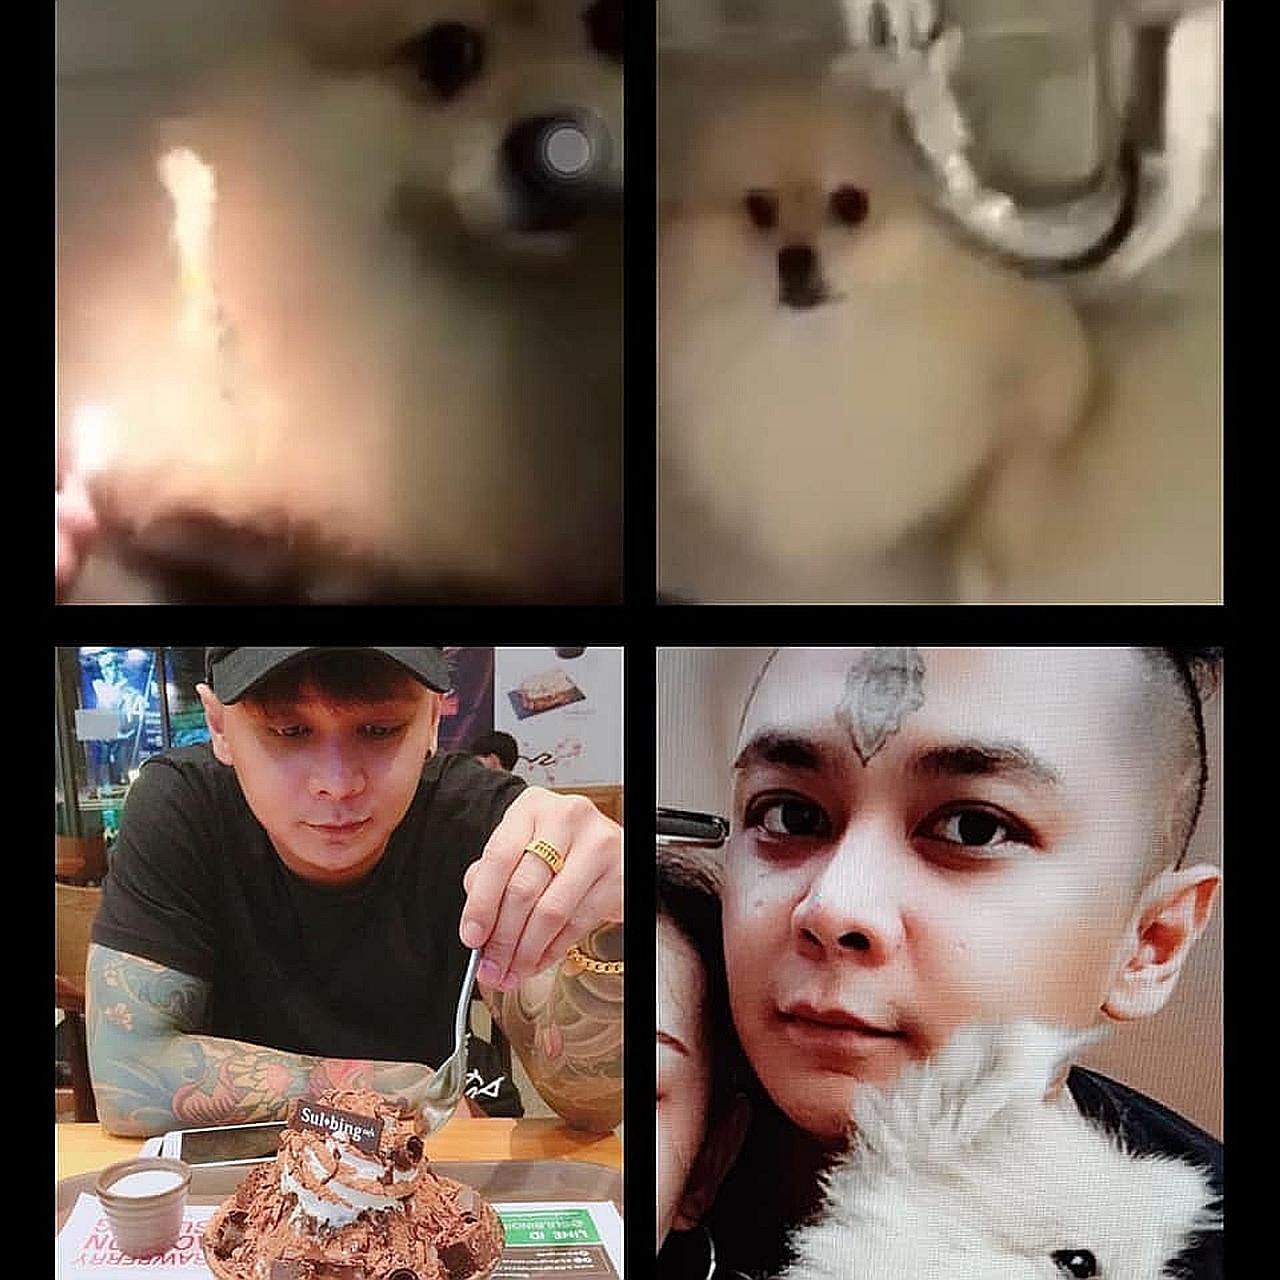 In his video posted on social media, a man hits a pomeranian with a helmet while the dog yelps and tries to hide.